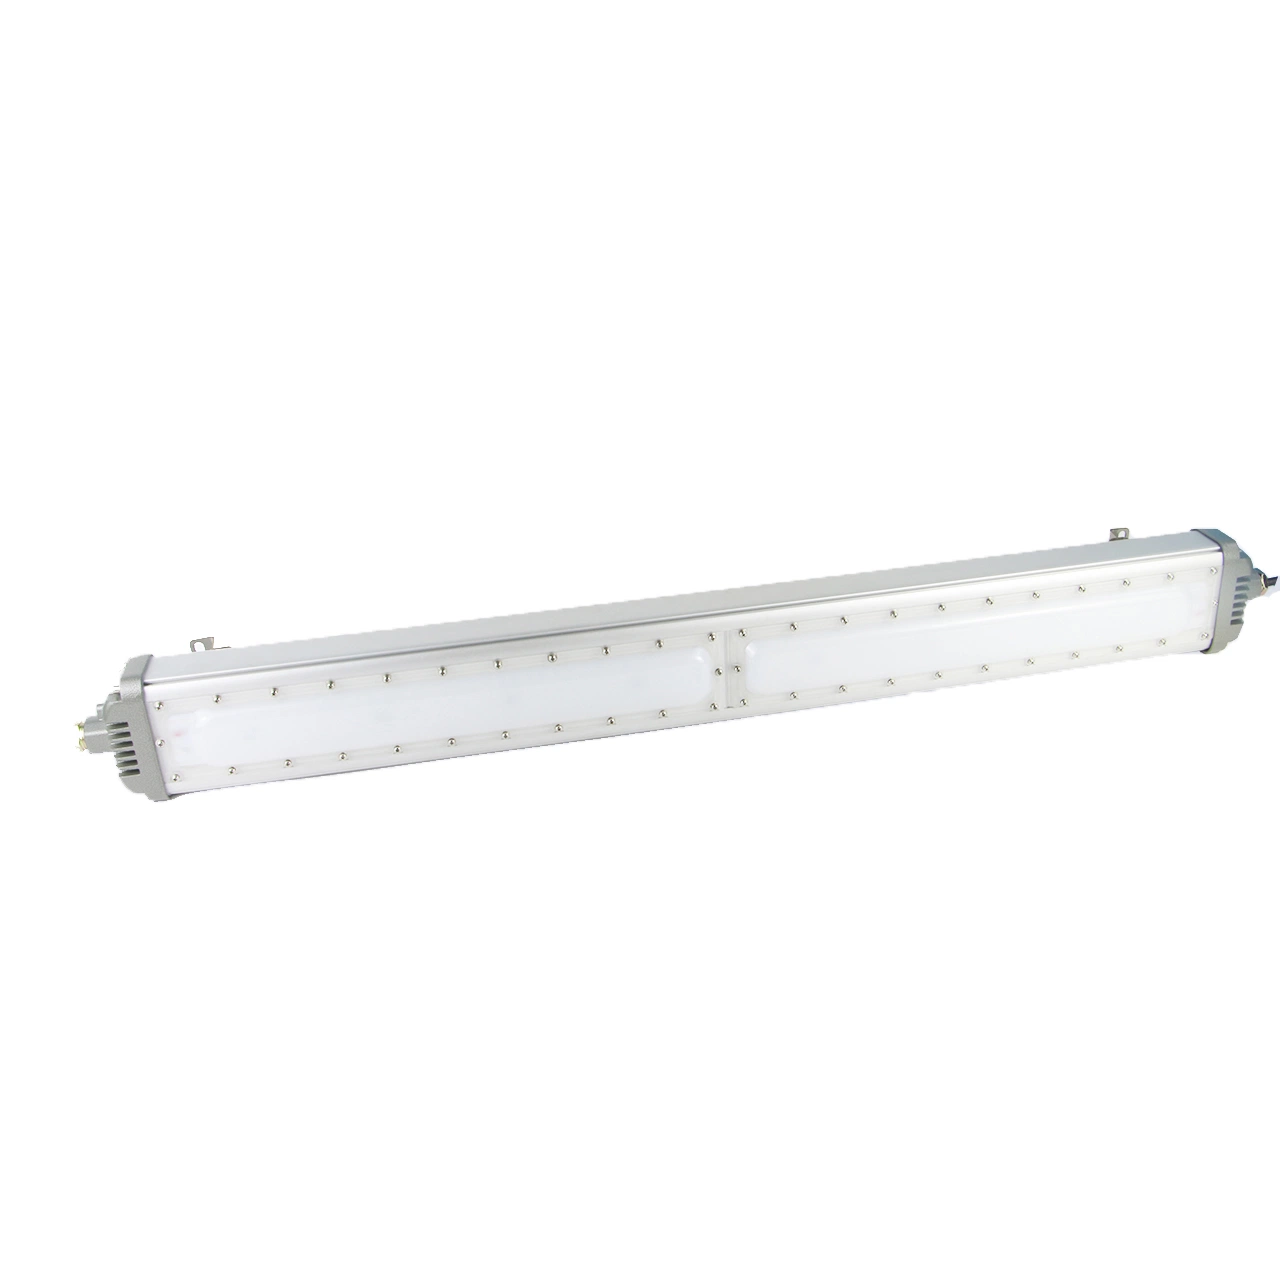 Explosion-Proof LED Lamps Ex Lighting Fixtures Industrial Linear Light Zone 1 and Zone 2 Harsh Area Ex Strip Light